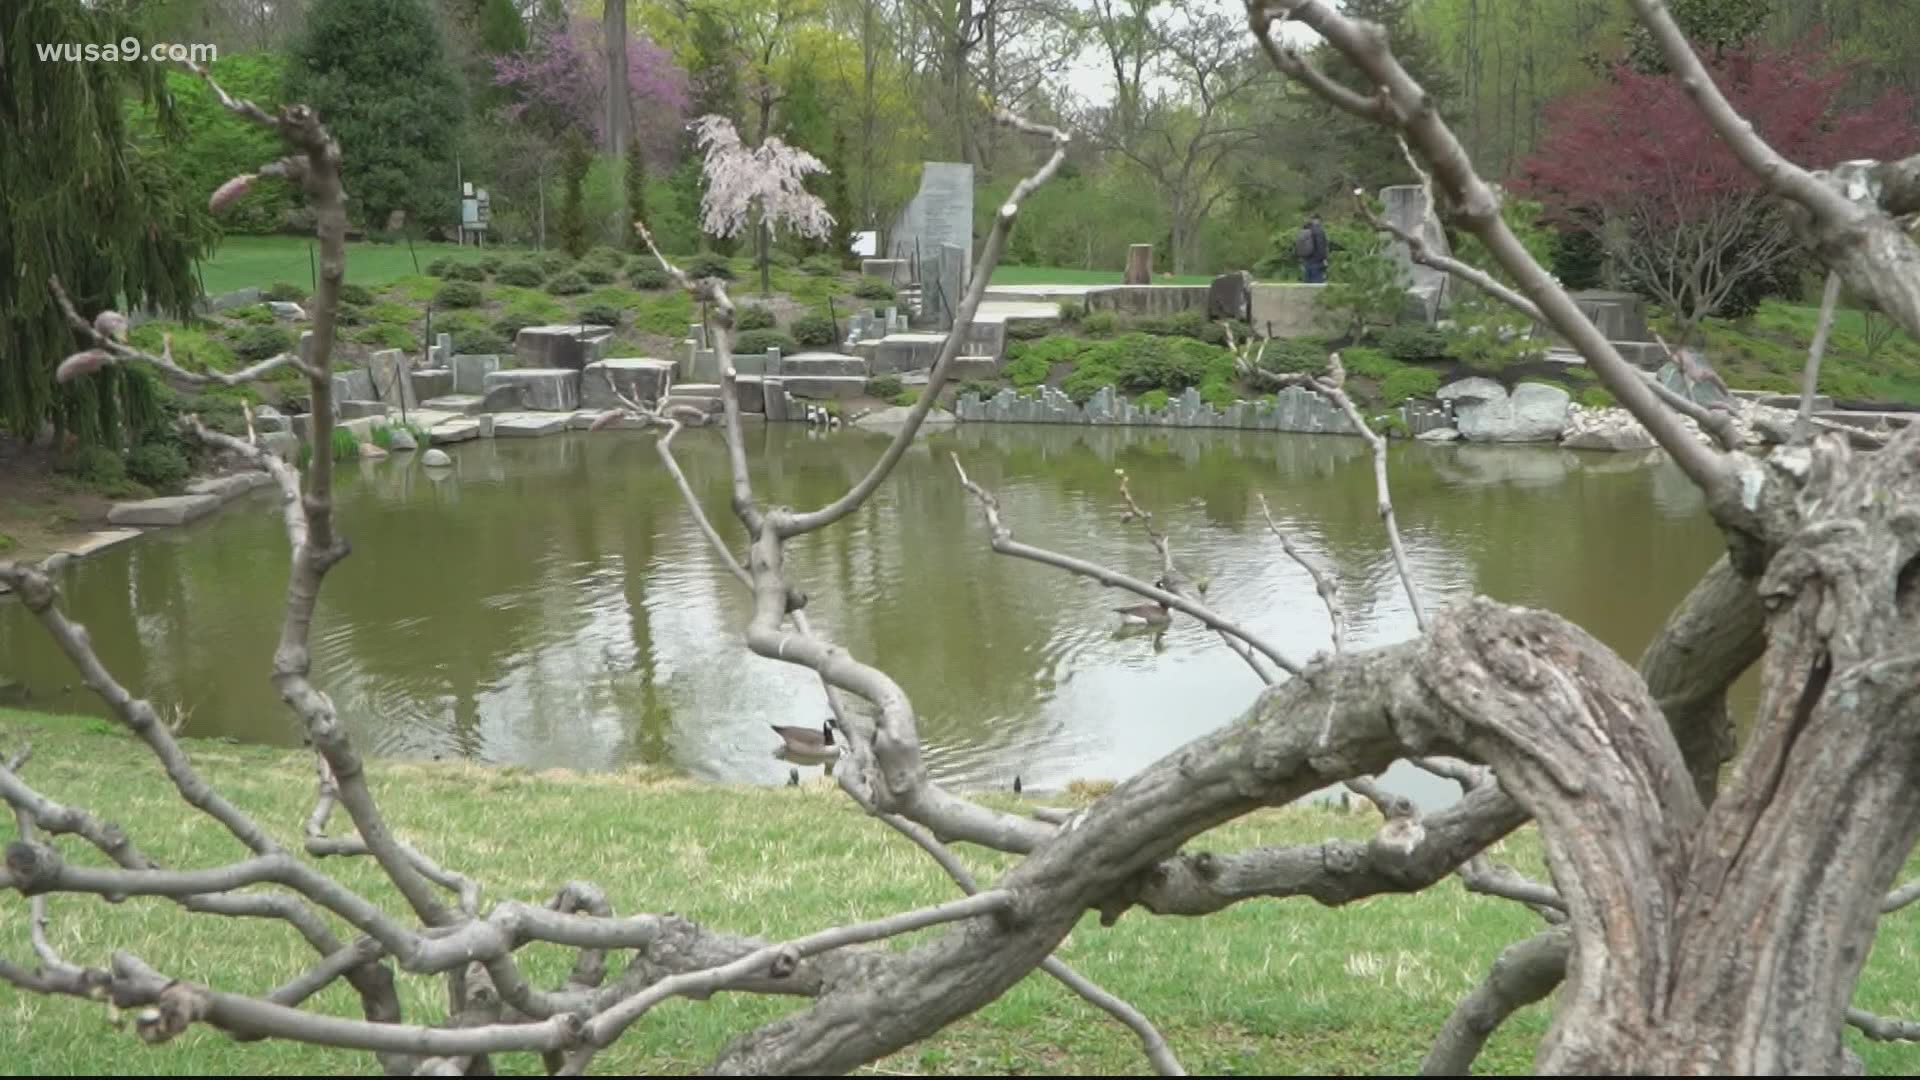 Brookside Gardens allows visitors to be inspired by nature.